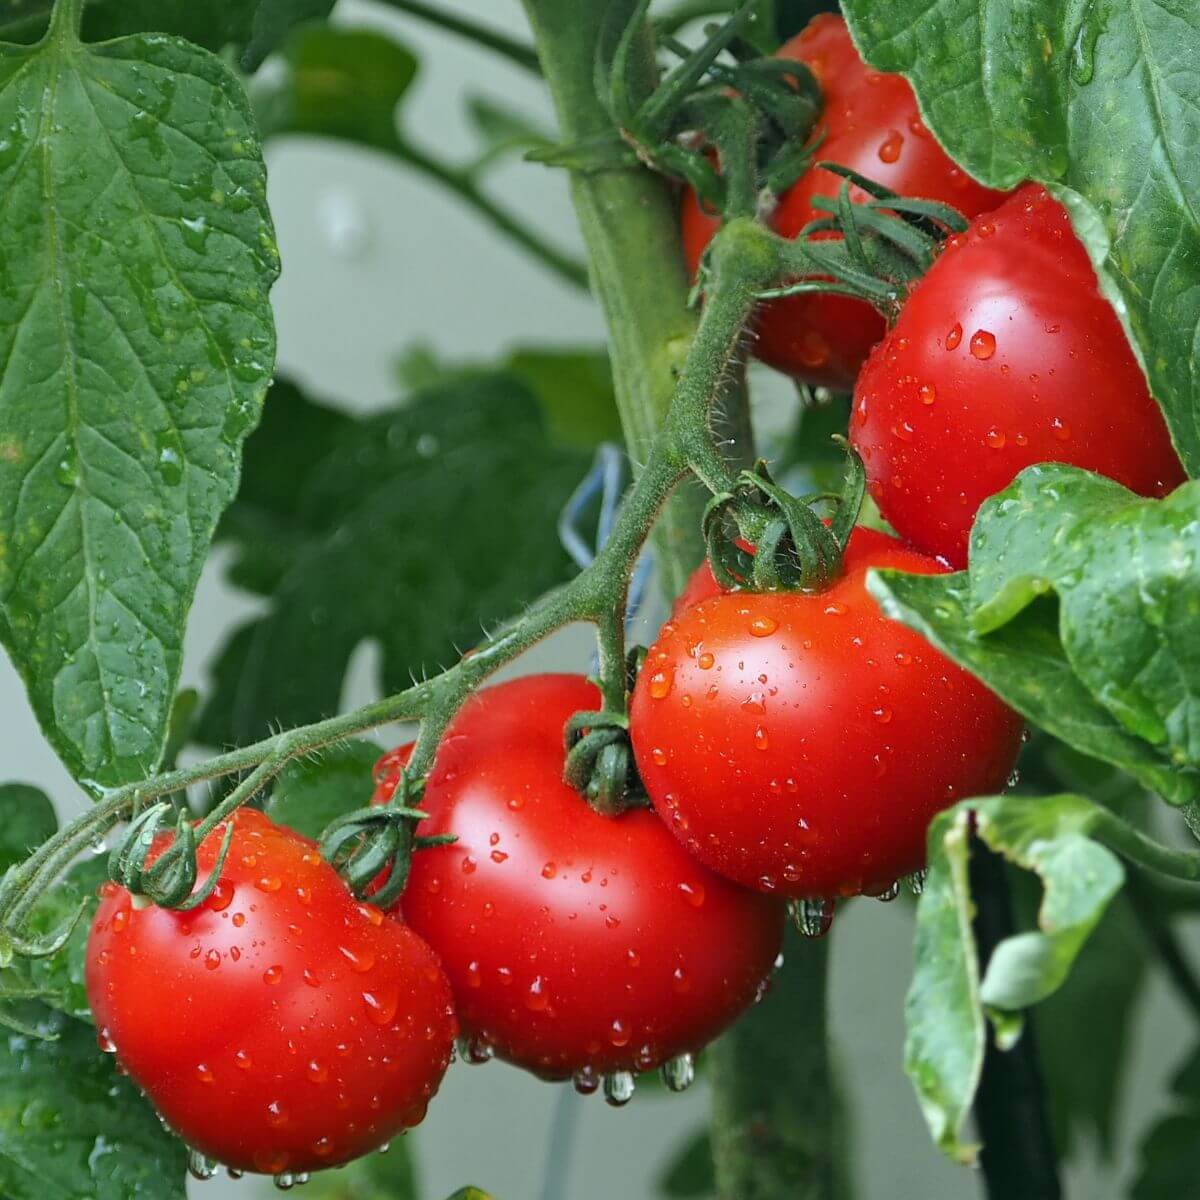 Tomato is great for the anti-inflammatory hormonal acne diet.